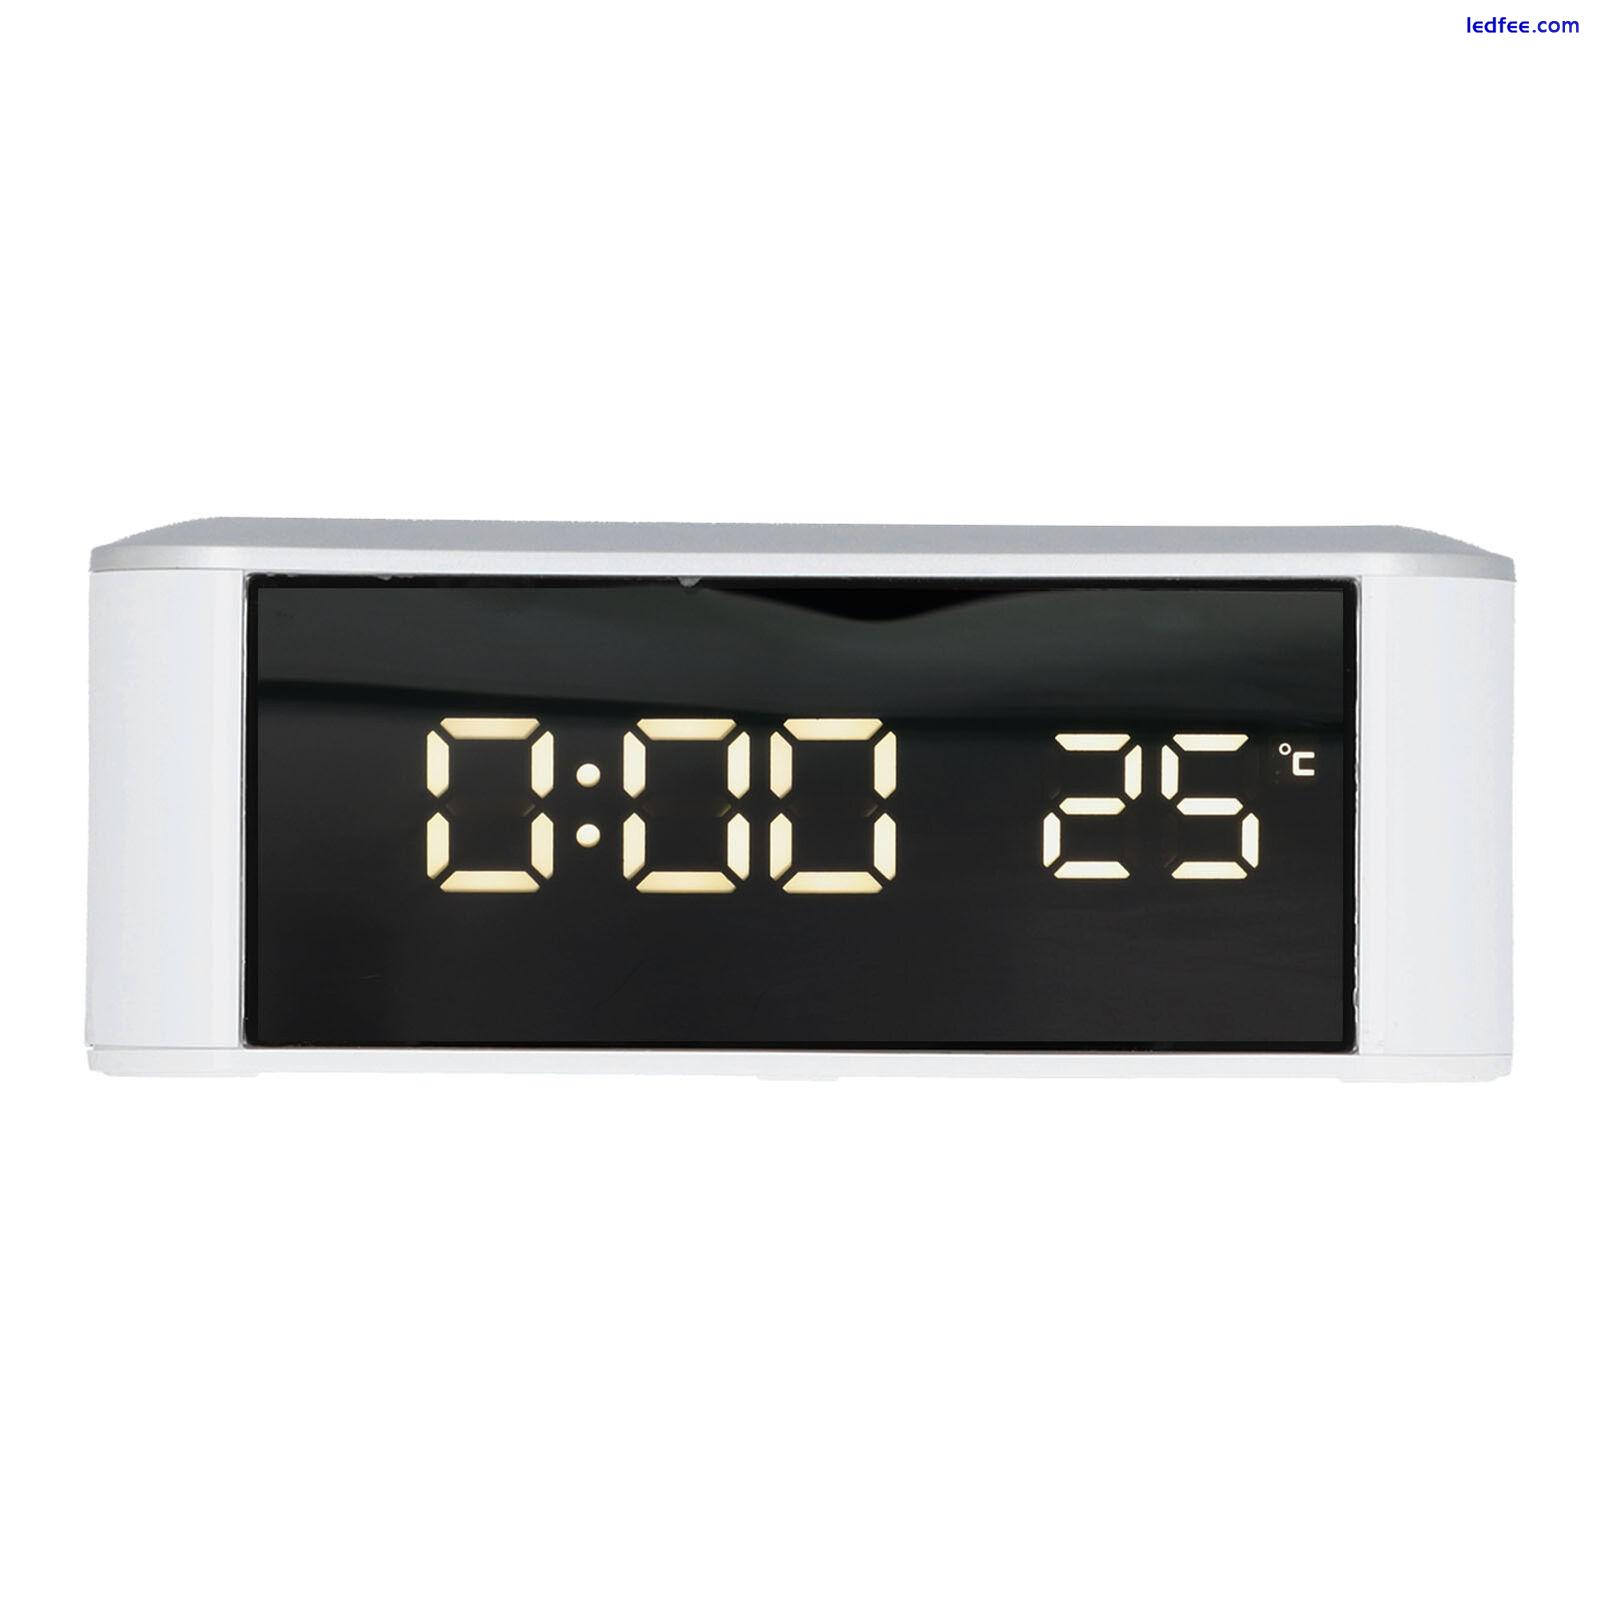 LED Alarm Clock Household Multifunctional Touch Screen Alarm Clock Indoor New 2 